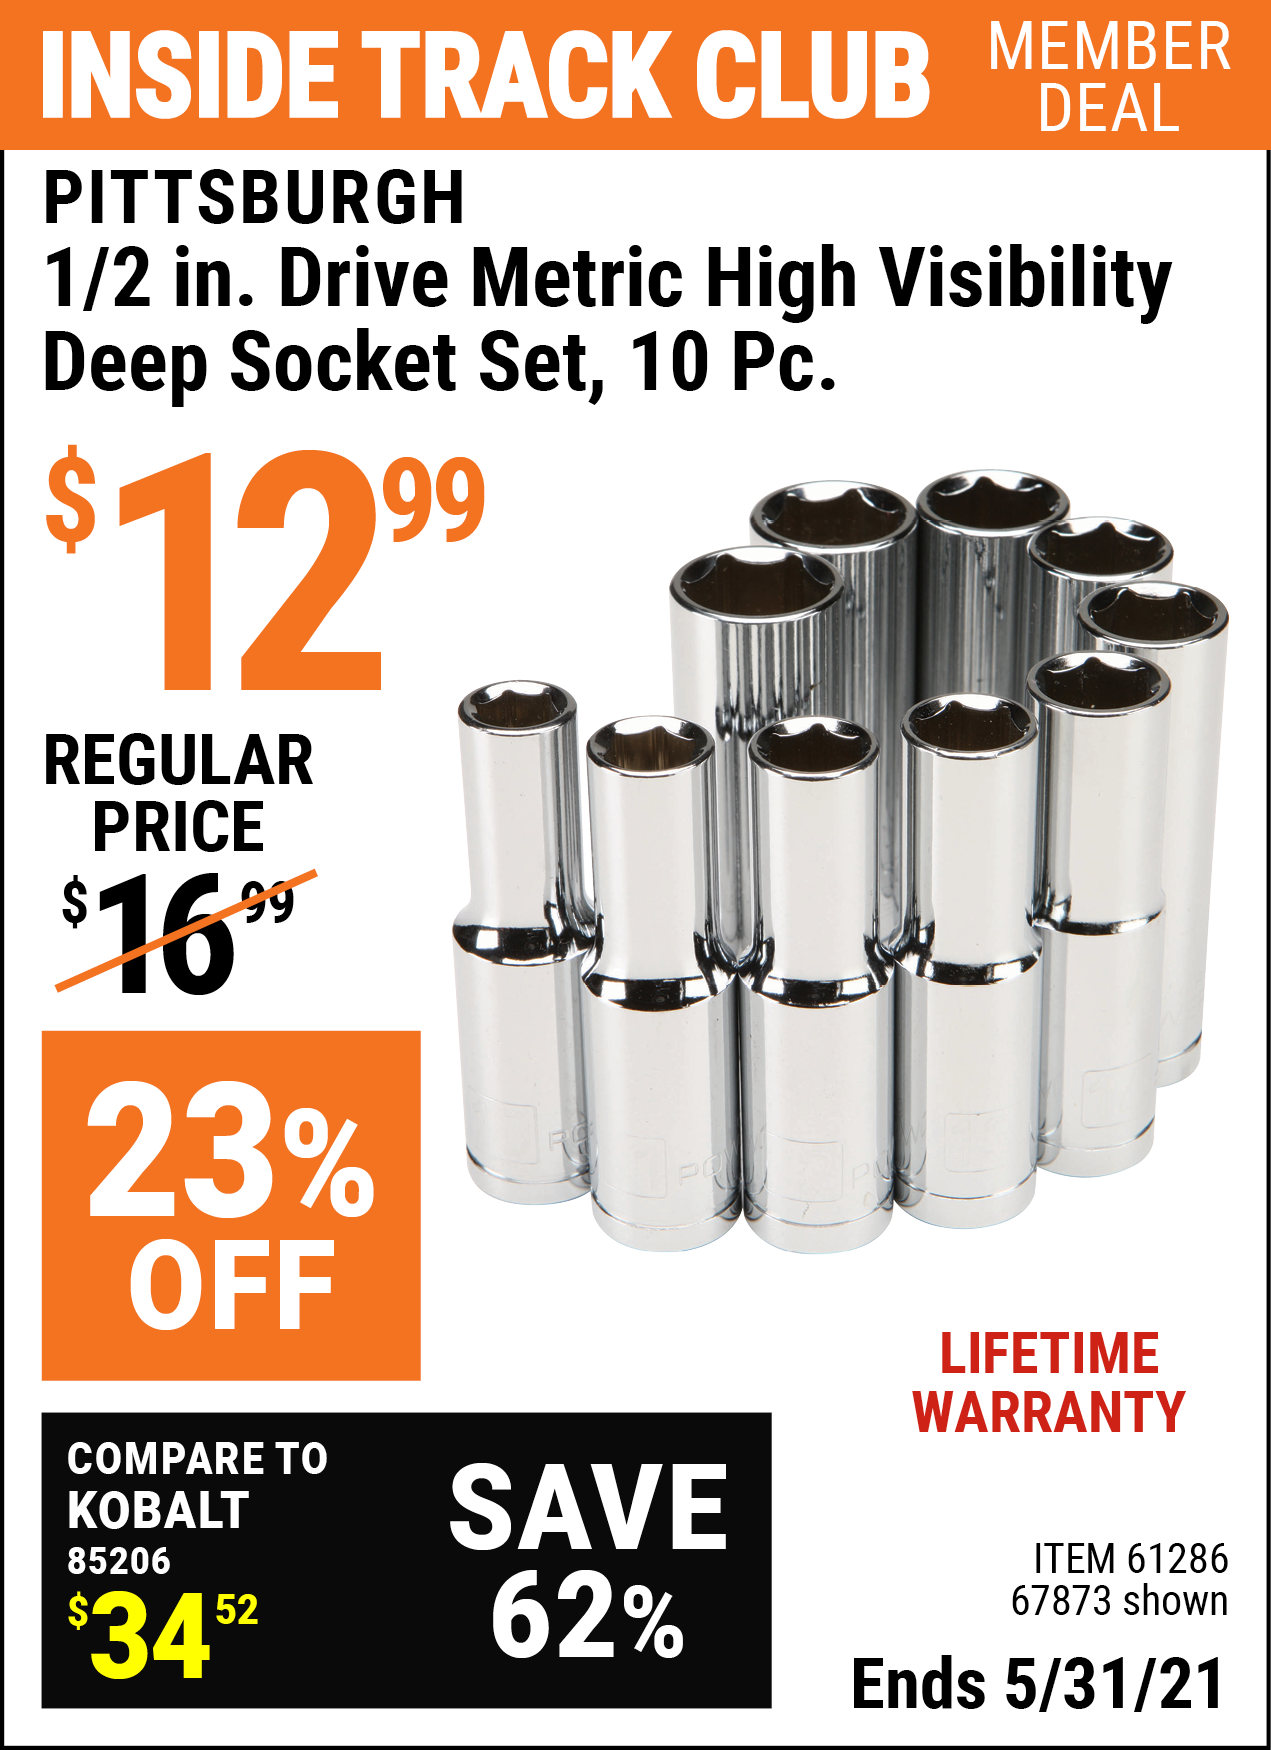 PITTSBURGH 1/2 in. Drive Metric High Visibility Deep Socket 10 Pc. for